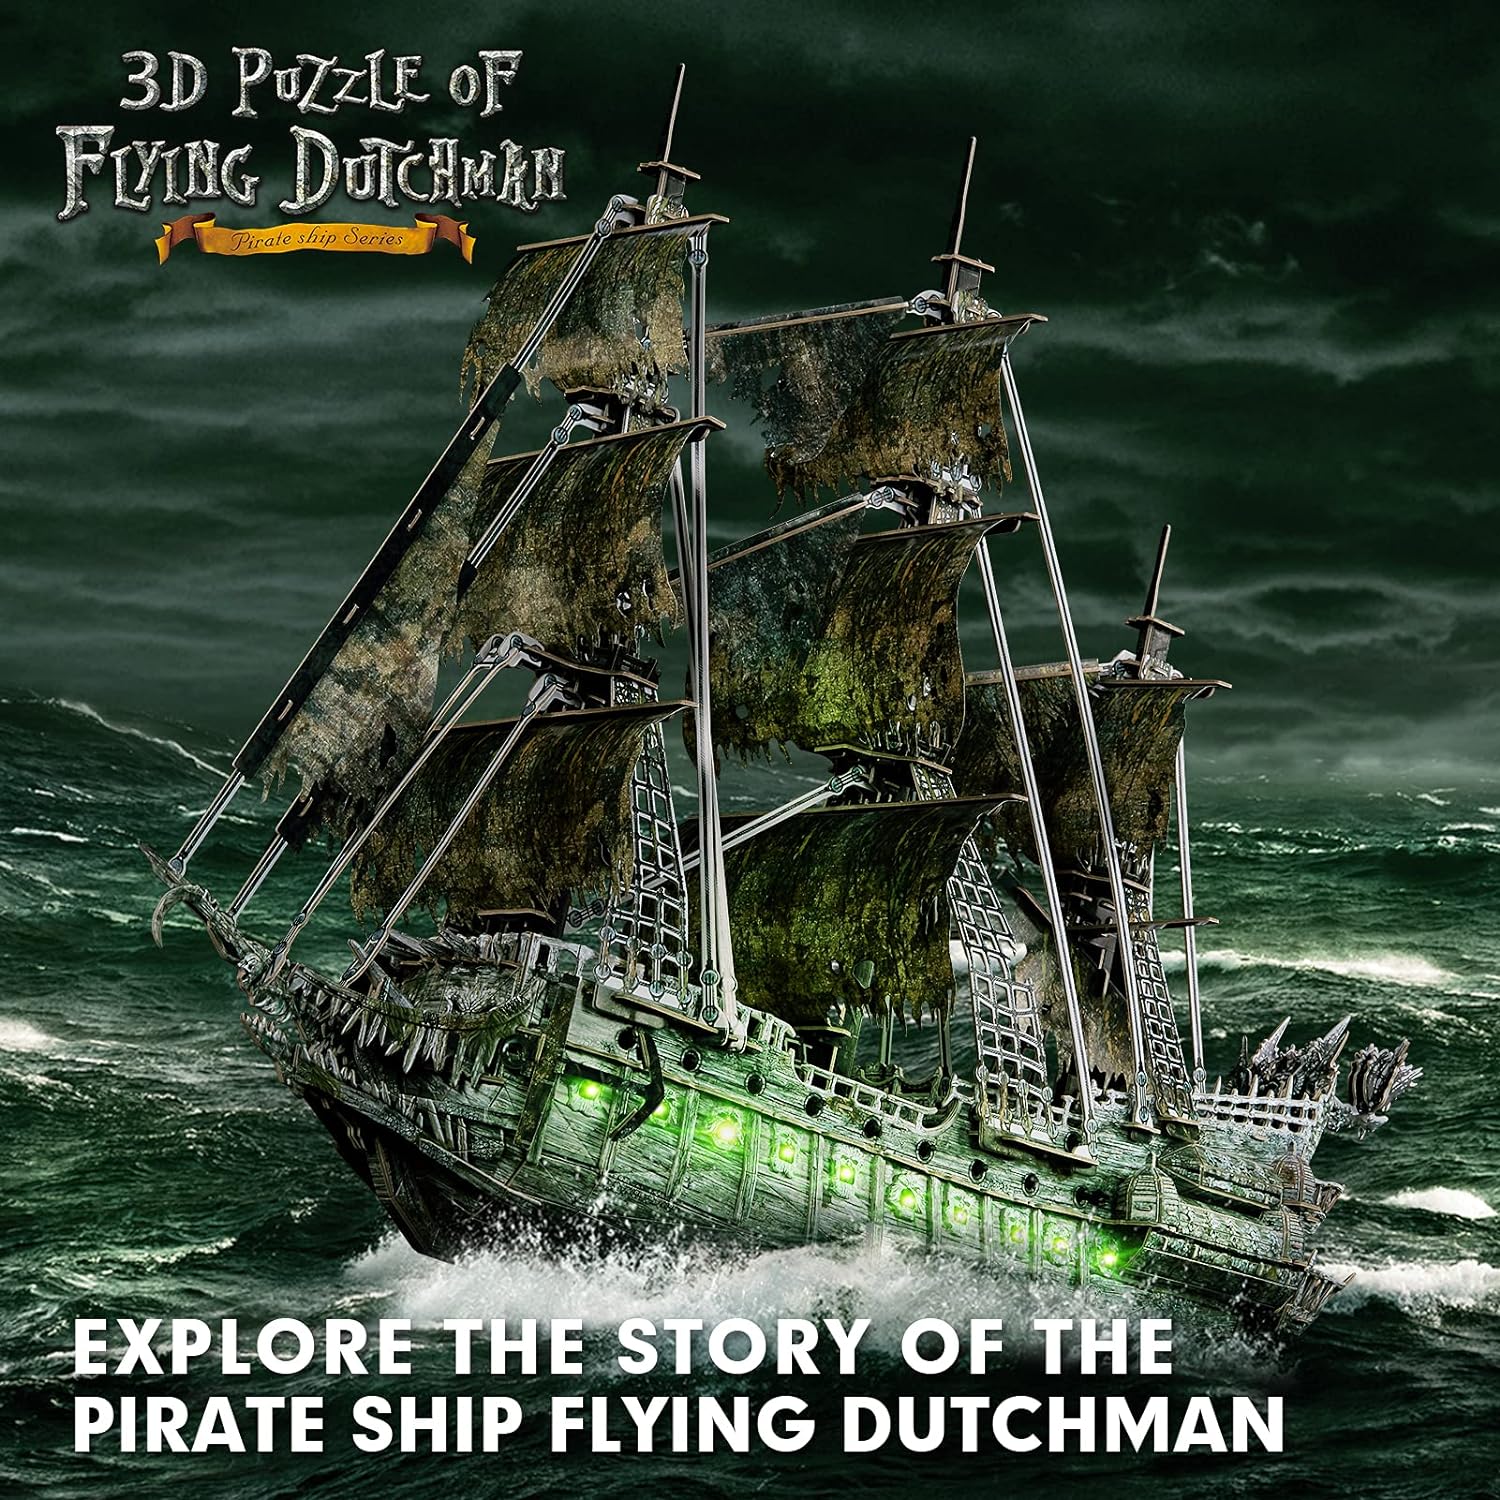 3D Green LED Flying Dutchman Pirate Ship Puzzle - 360 Pieces Haunted Ghost Ship Model Kit and Desk Decor